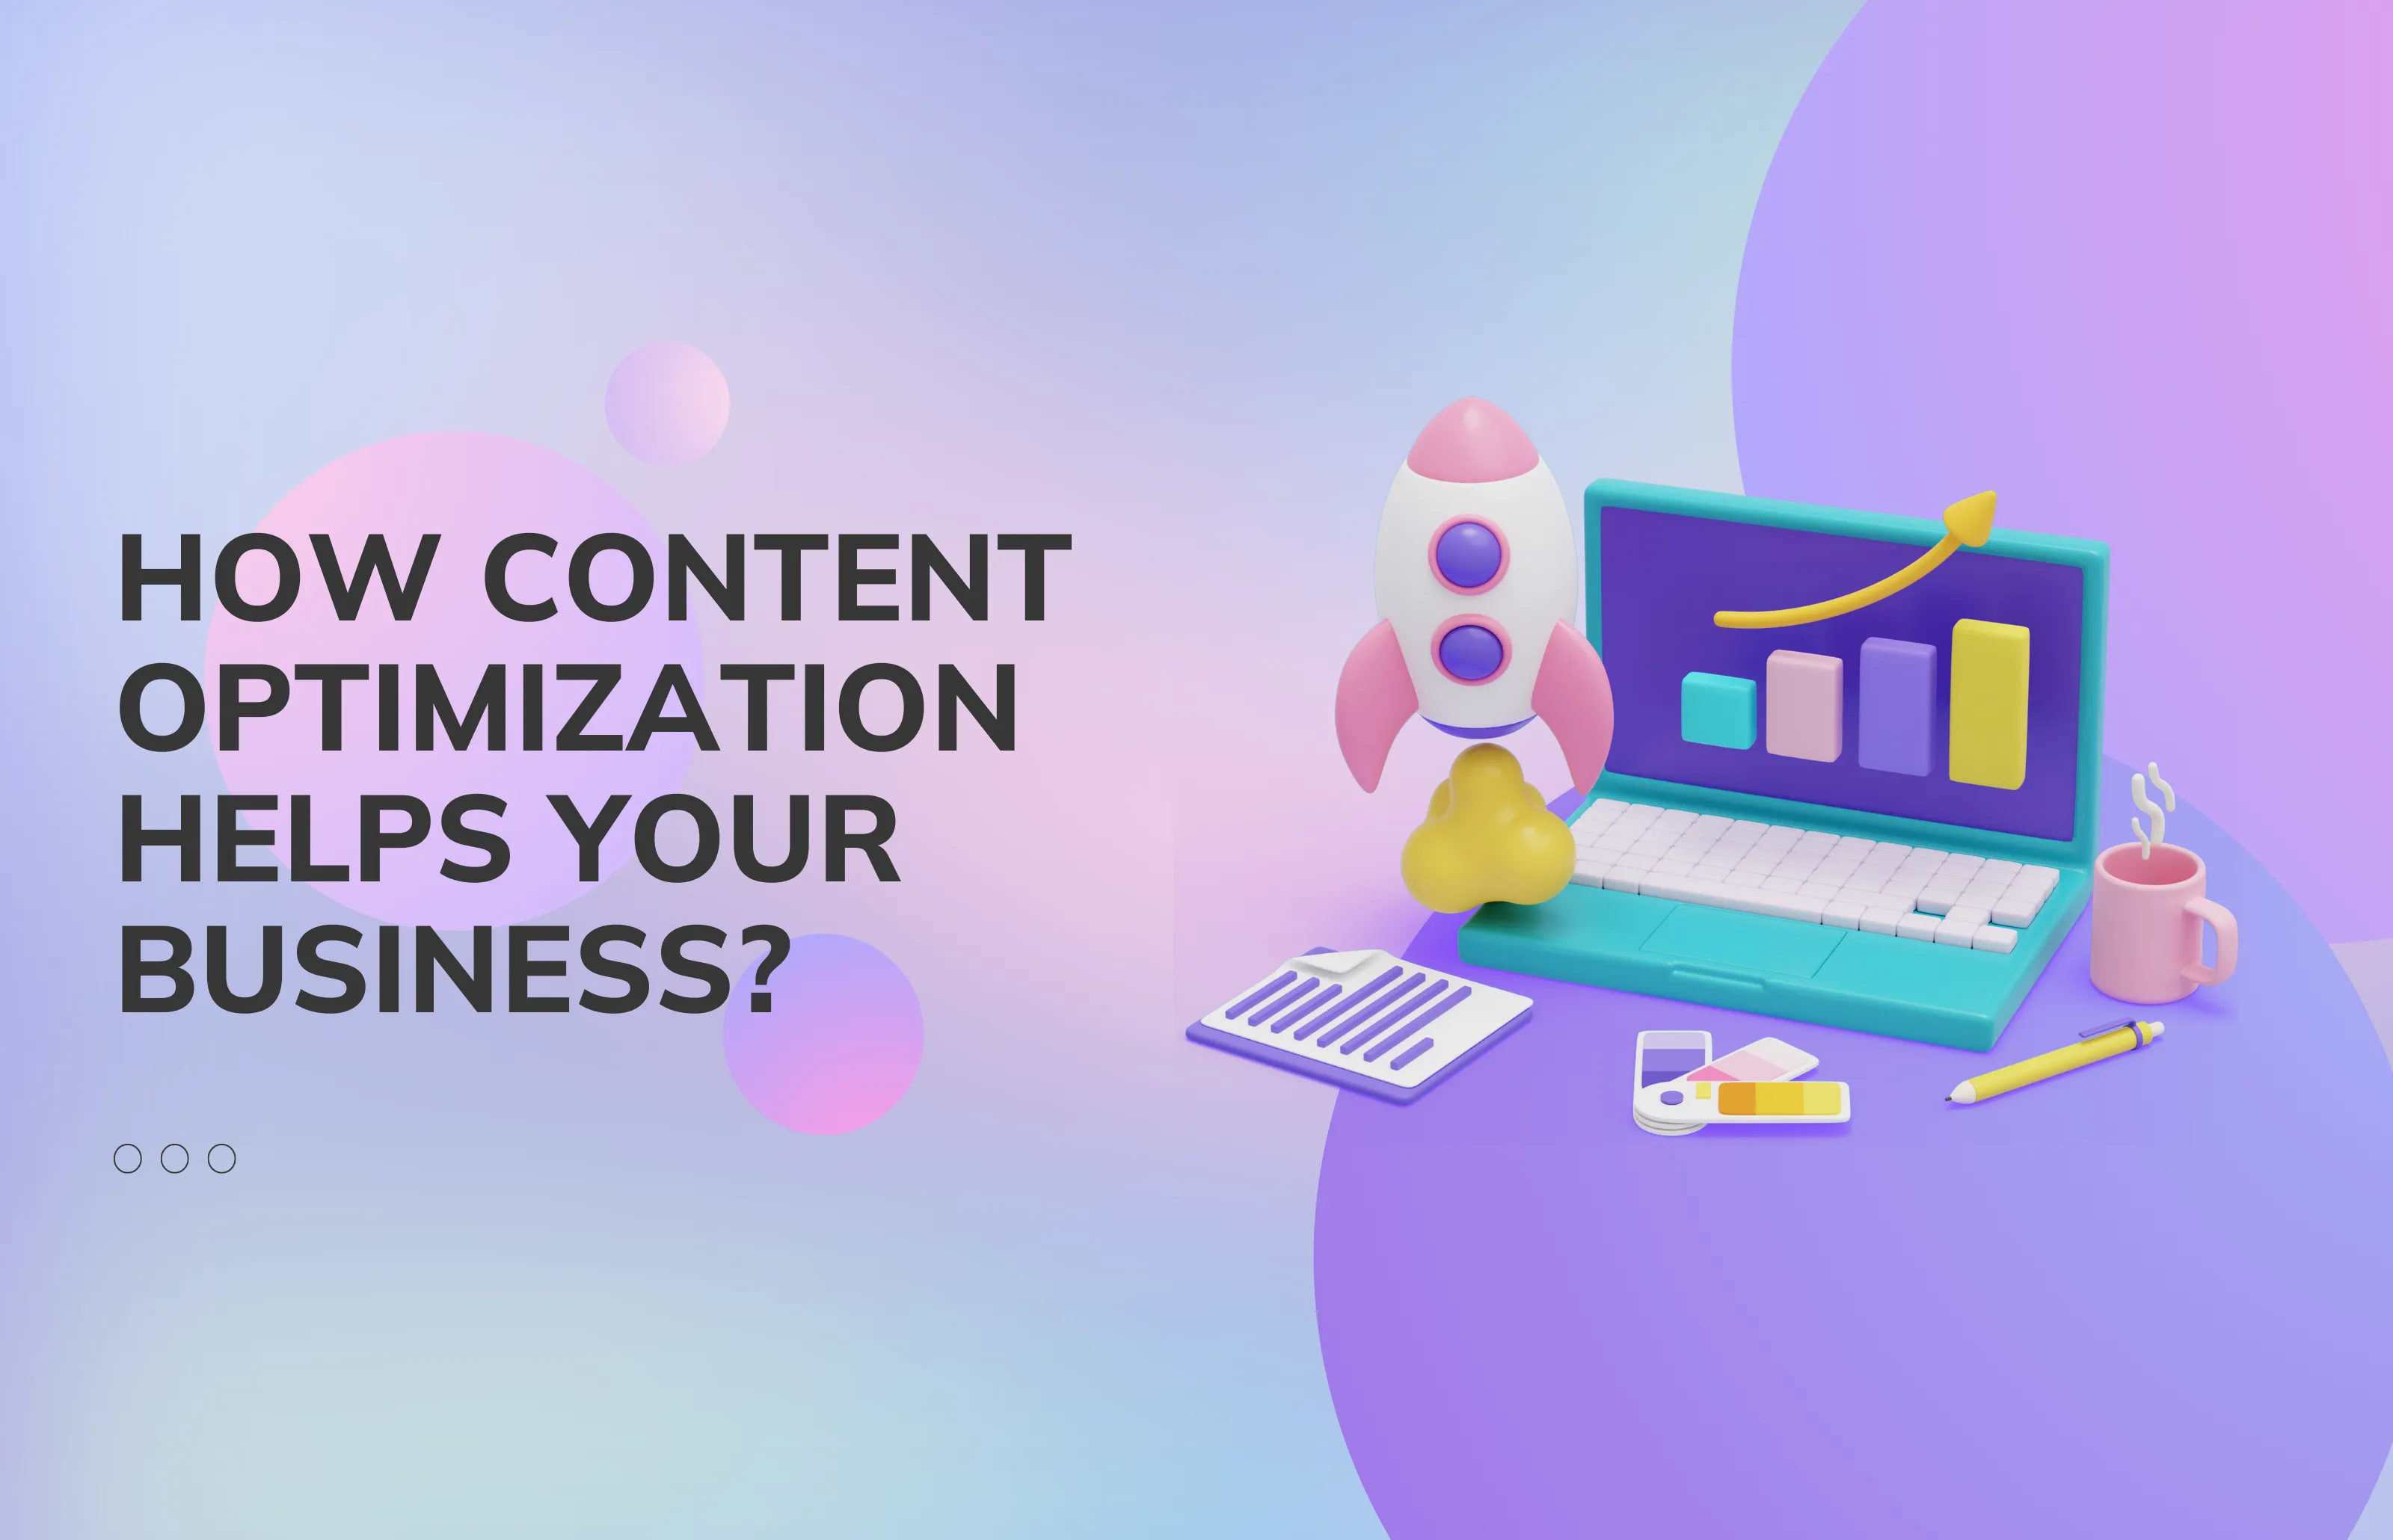  How Content Optimization Helps Your Business